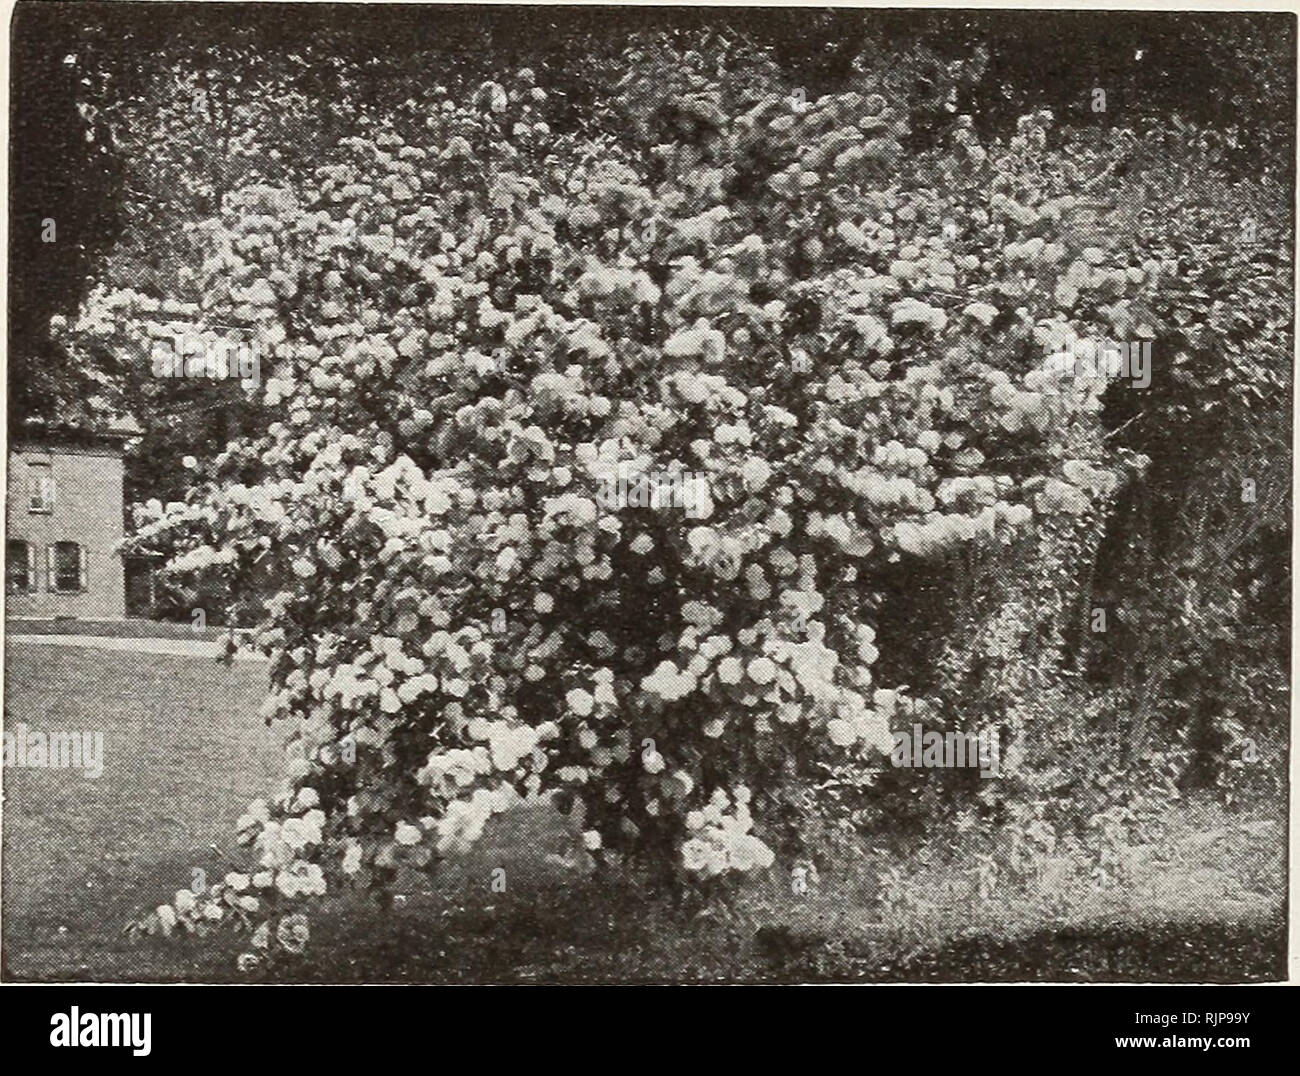 . Autumn edition : new guide to rose culture 1921. 32 THE DINGER &amp; CONARD COMPANY, WEST GROVE, PA.. Double Japan Snowball in full bloom. Spirea - Meadow Sweet Aurea (Golden Leaved).âBright golden yellow foliage and small white flowers. Billardi.âSpikes of rose-colored flowers; blooms pro- fusely. Bumalda.âDwarf-growing. Flowers rose-colored. Callosa Alba.âDwarf white-flowering variety. Callosa Rubra.âGrows 3 to 4 feet high; deep, rosy, red flowers. Callosa Superba.âLight red flowers in profusion. Prunifolia (Bridal Wreath).âDouble, pure white flowers. Reevesii.âSingle, pure white; blooms l Stock Photo